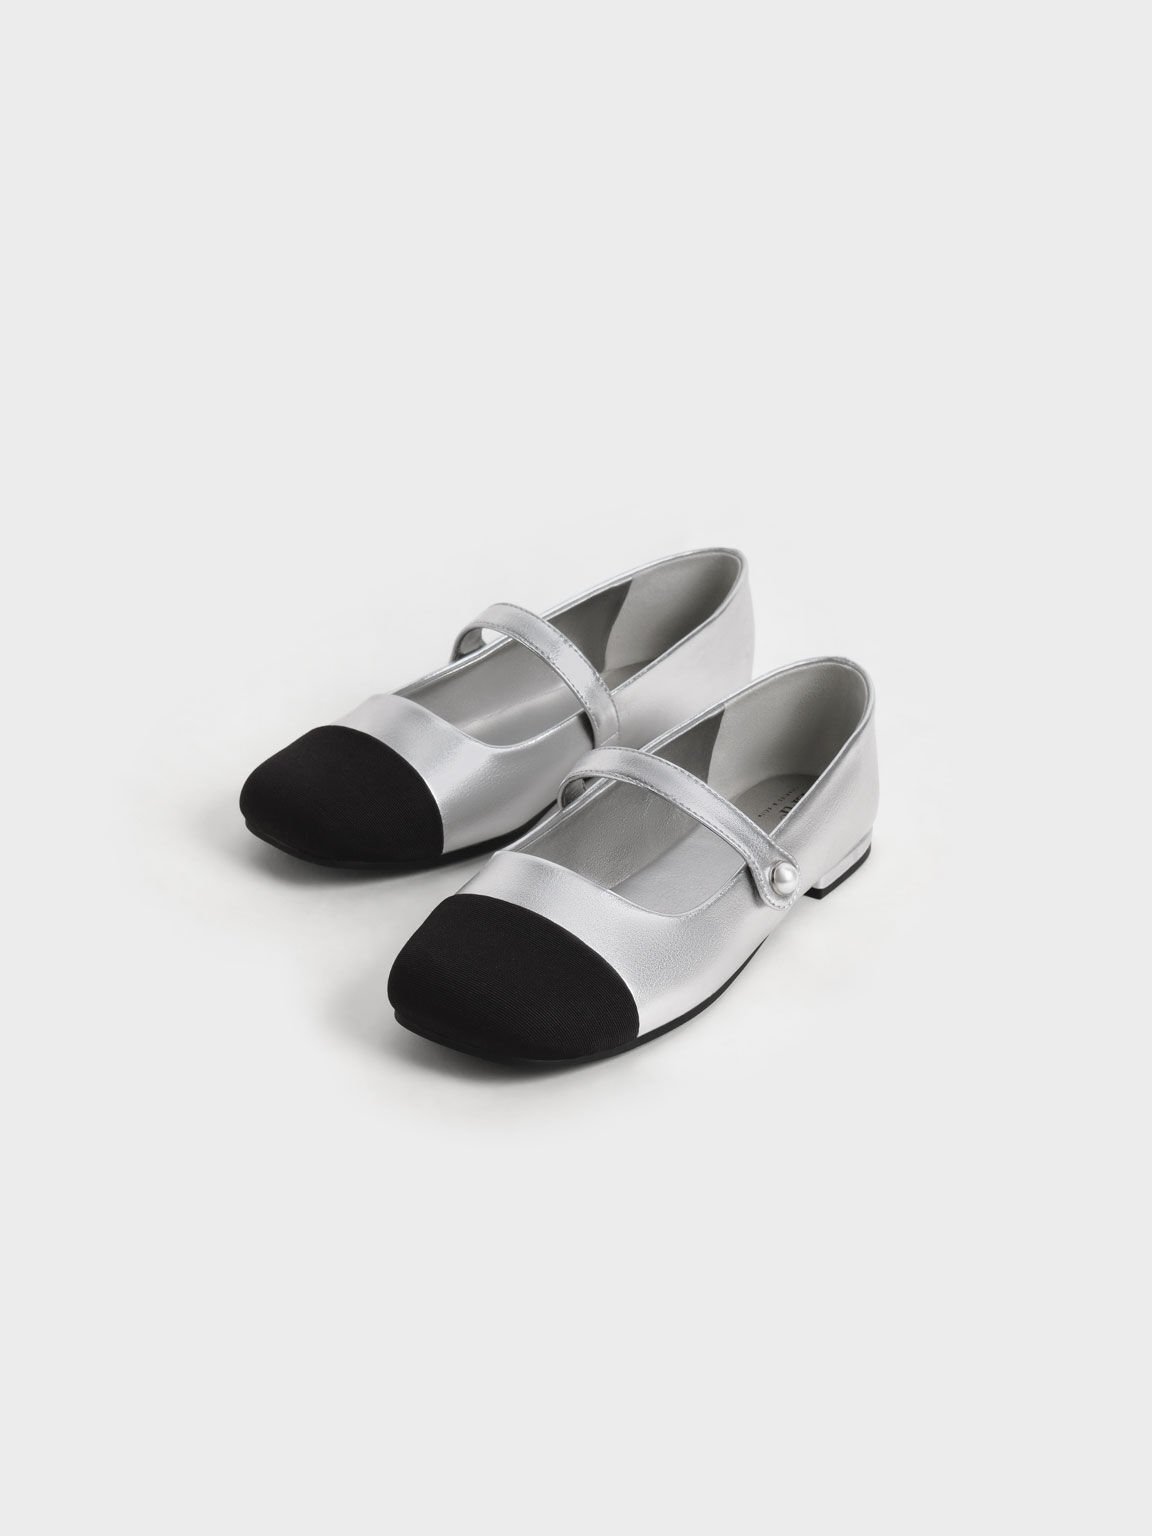 Girls' Bead-Embellished Mary Janes, Silver, hi-res